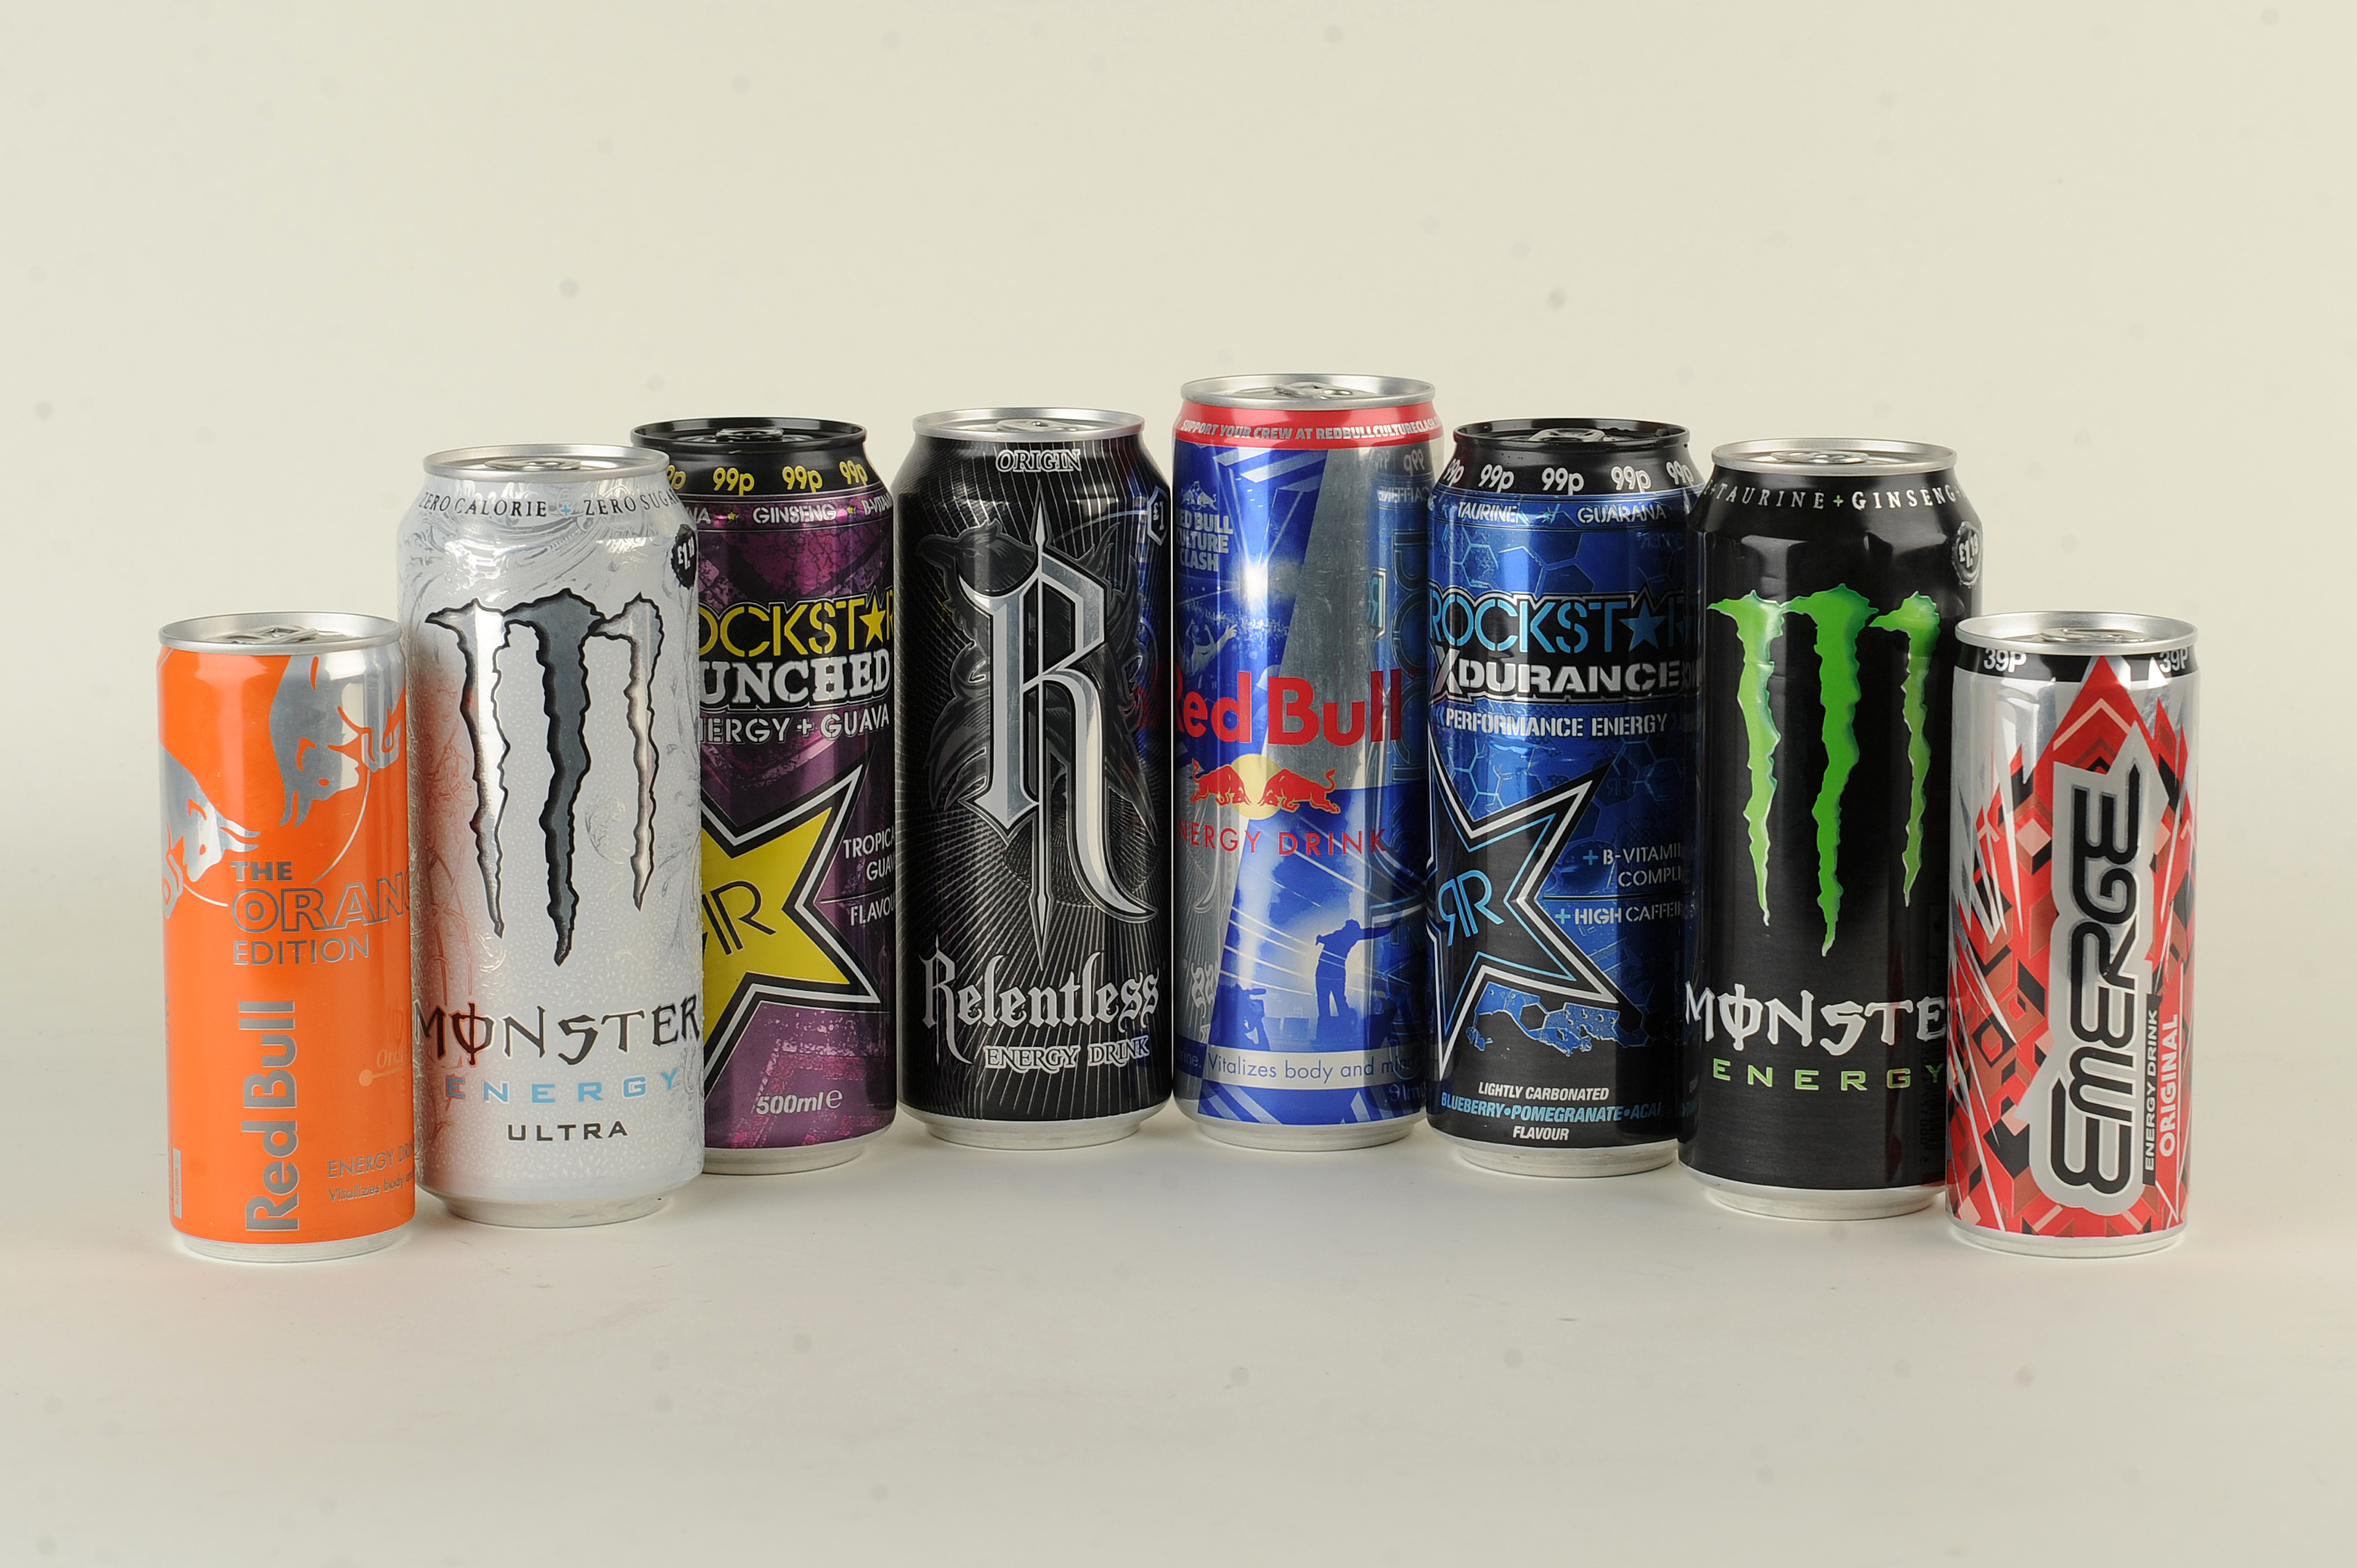 Scottish minsters are considering protecting children with a ban on energy drinks.